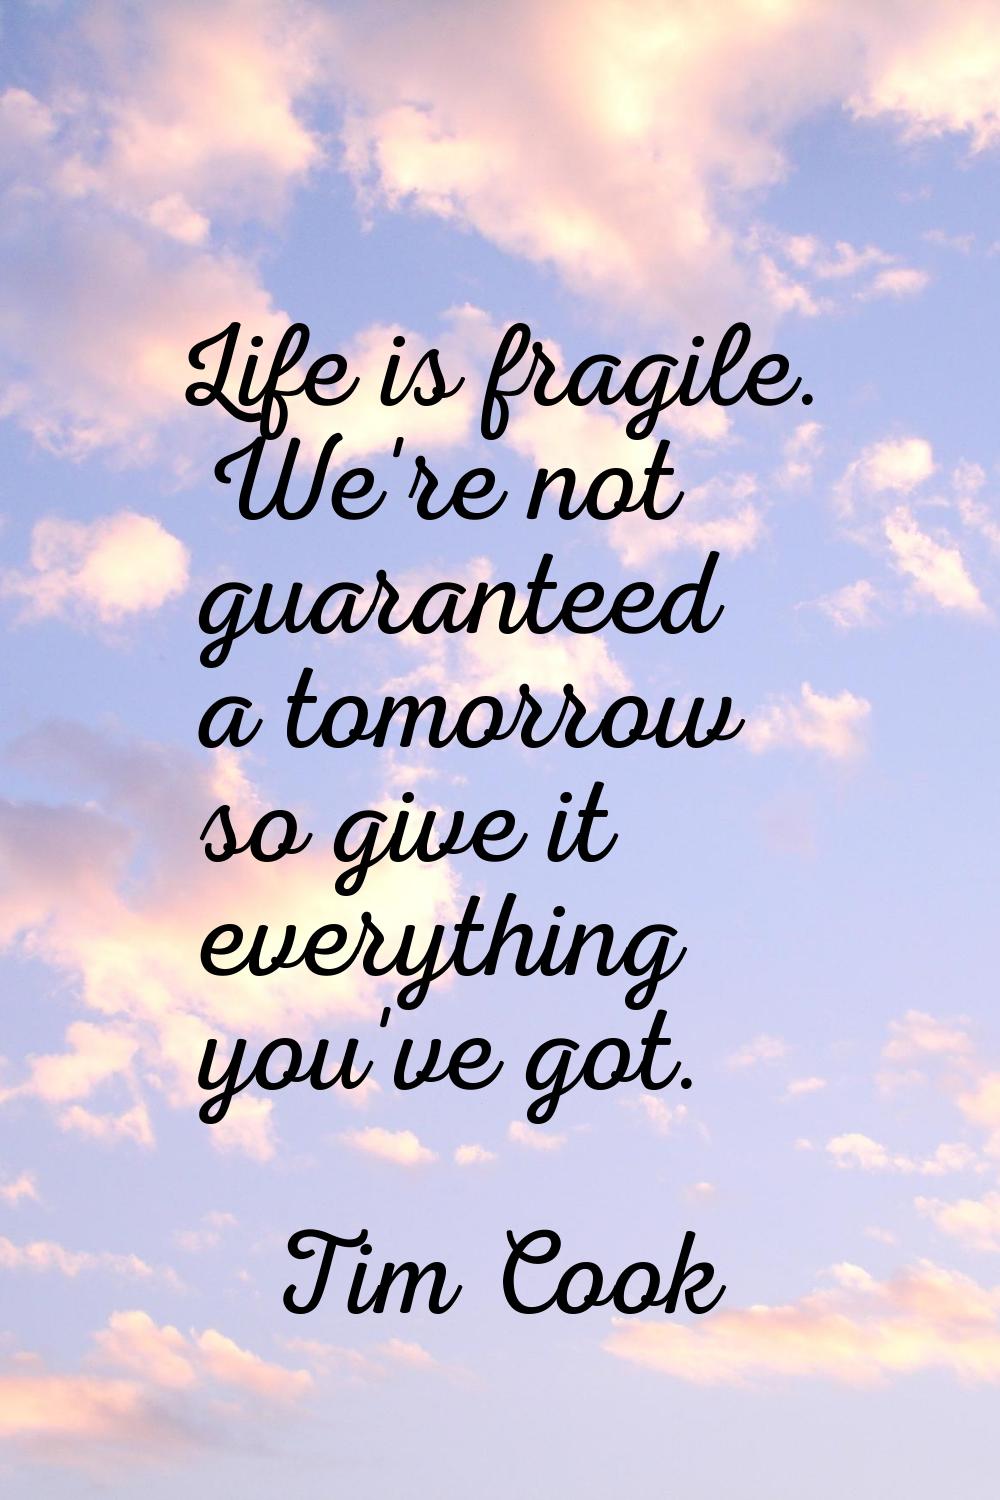 Life is fragile. We're not guaranteed a tomorrow so give it everything you've got.